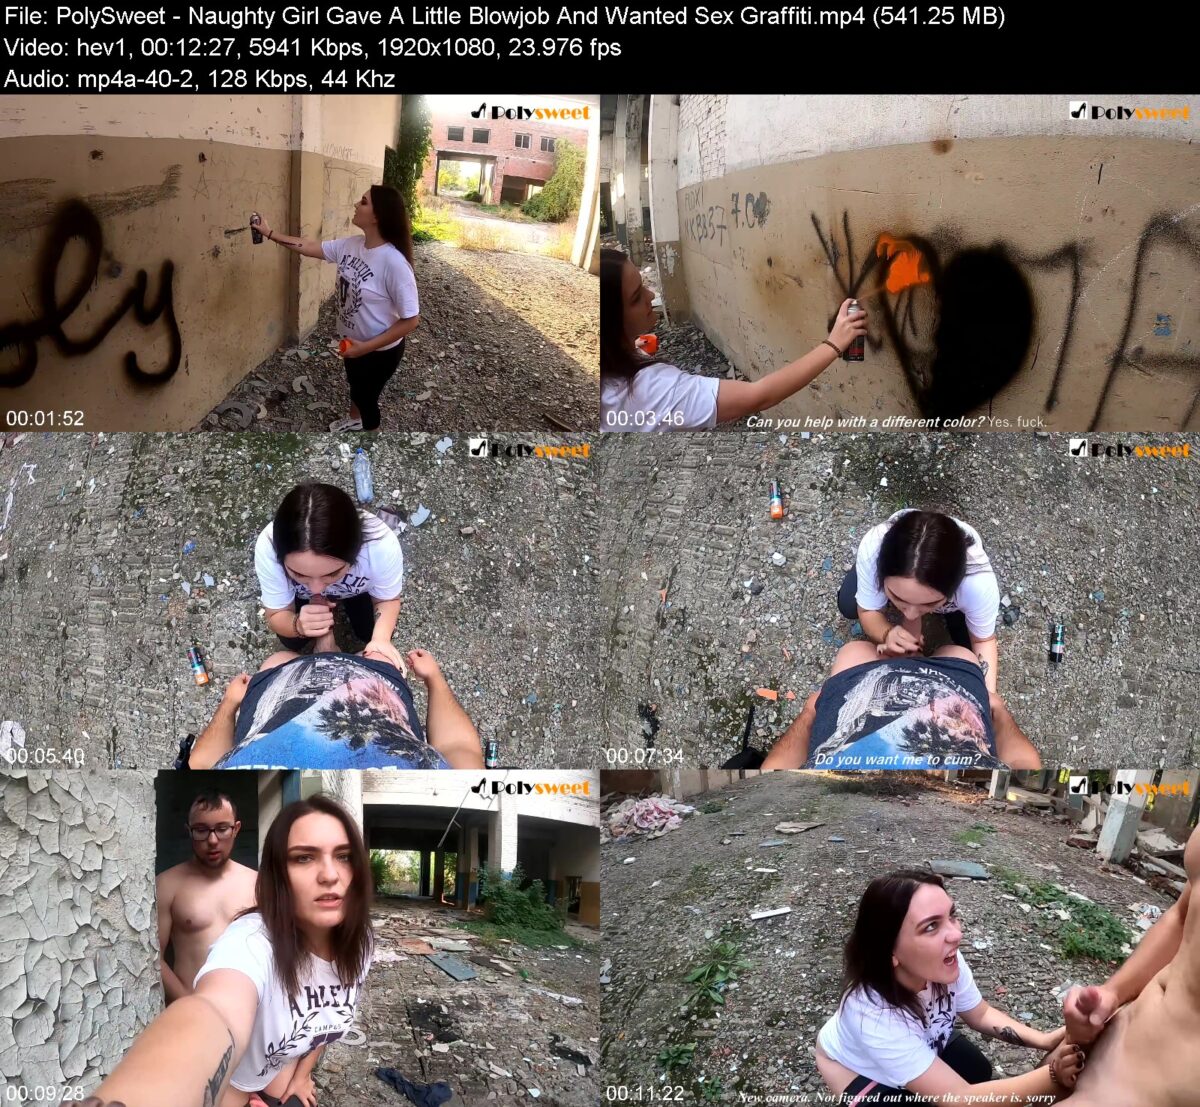 PolySweet - Naughty Girl Gave A Little Blowjob And Wanted Sex Graffiti